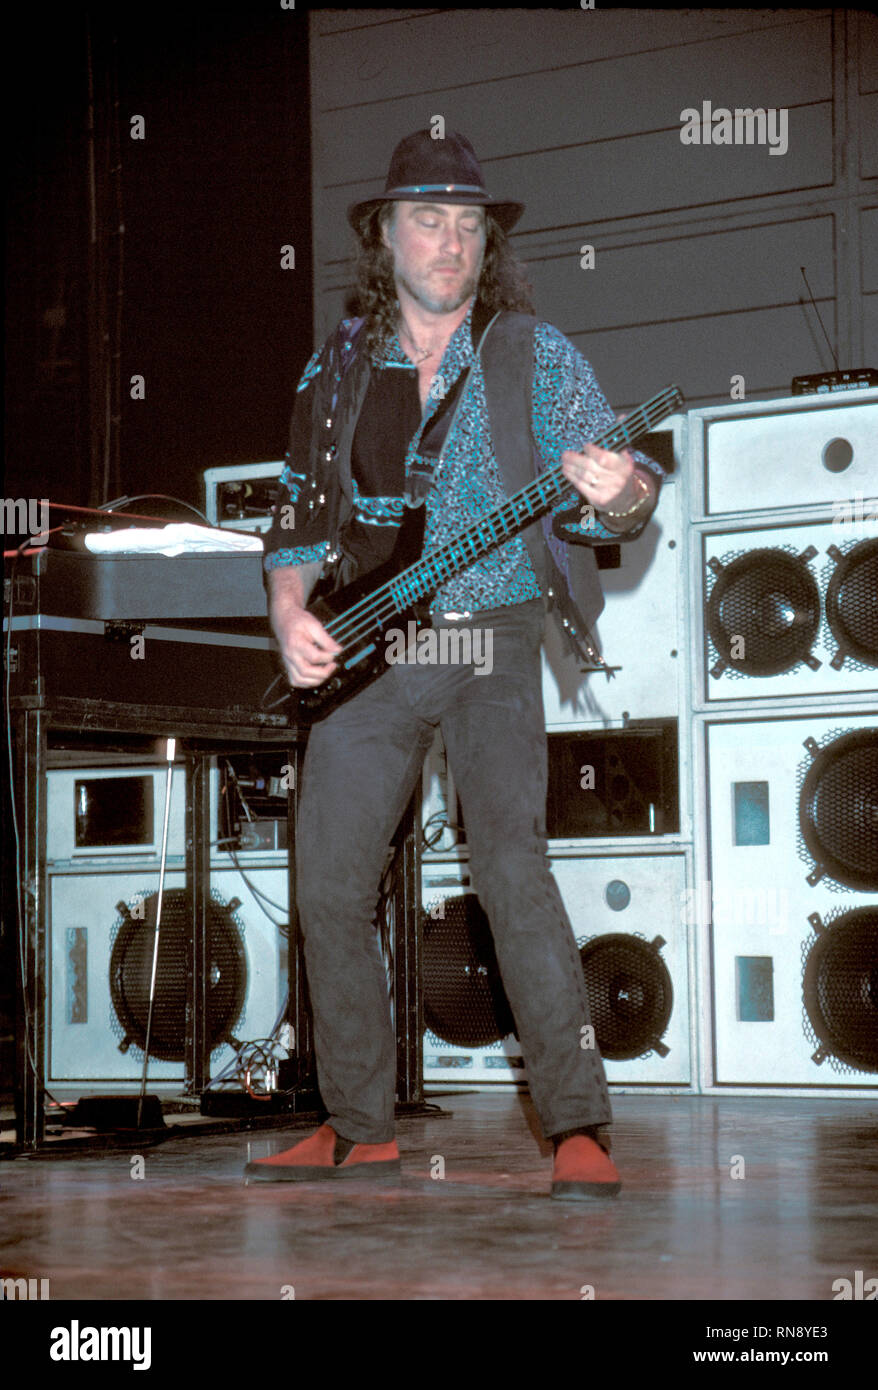 Deep Purple bassist Roger Glover is shown performing on stage during a 'live' concert appearance. Stock Photo